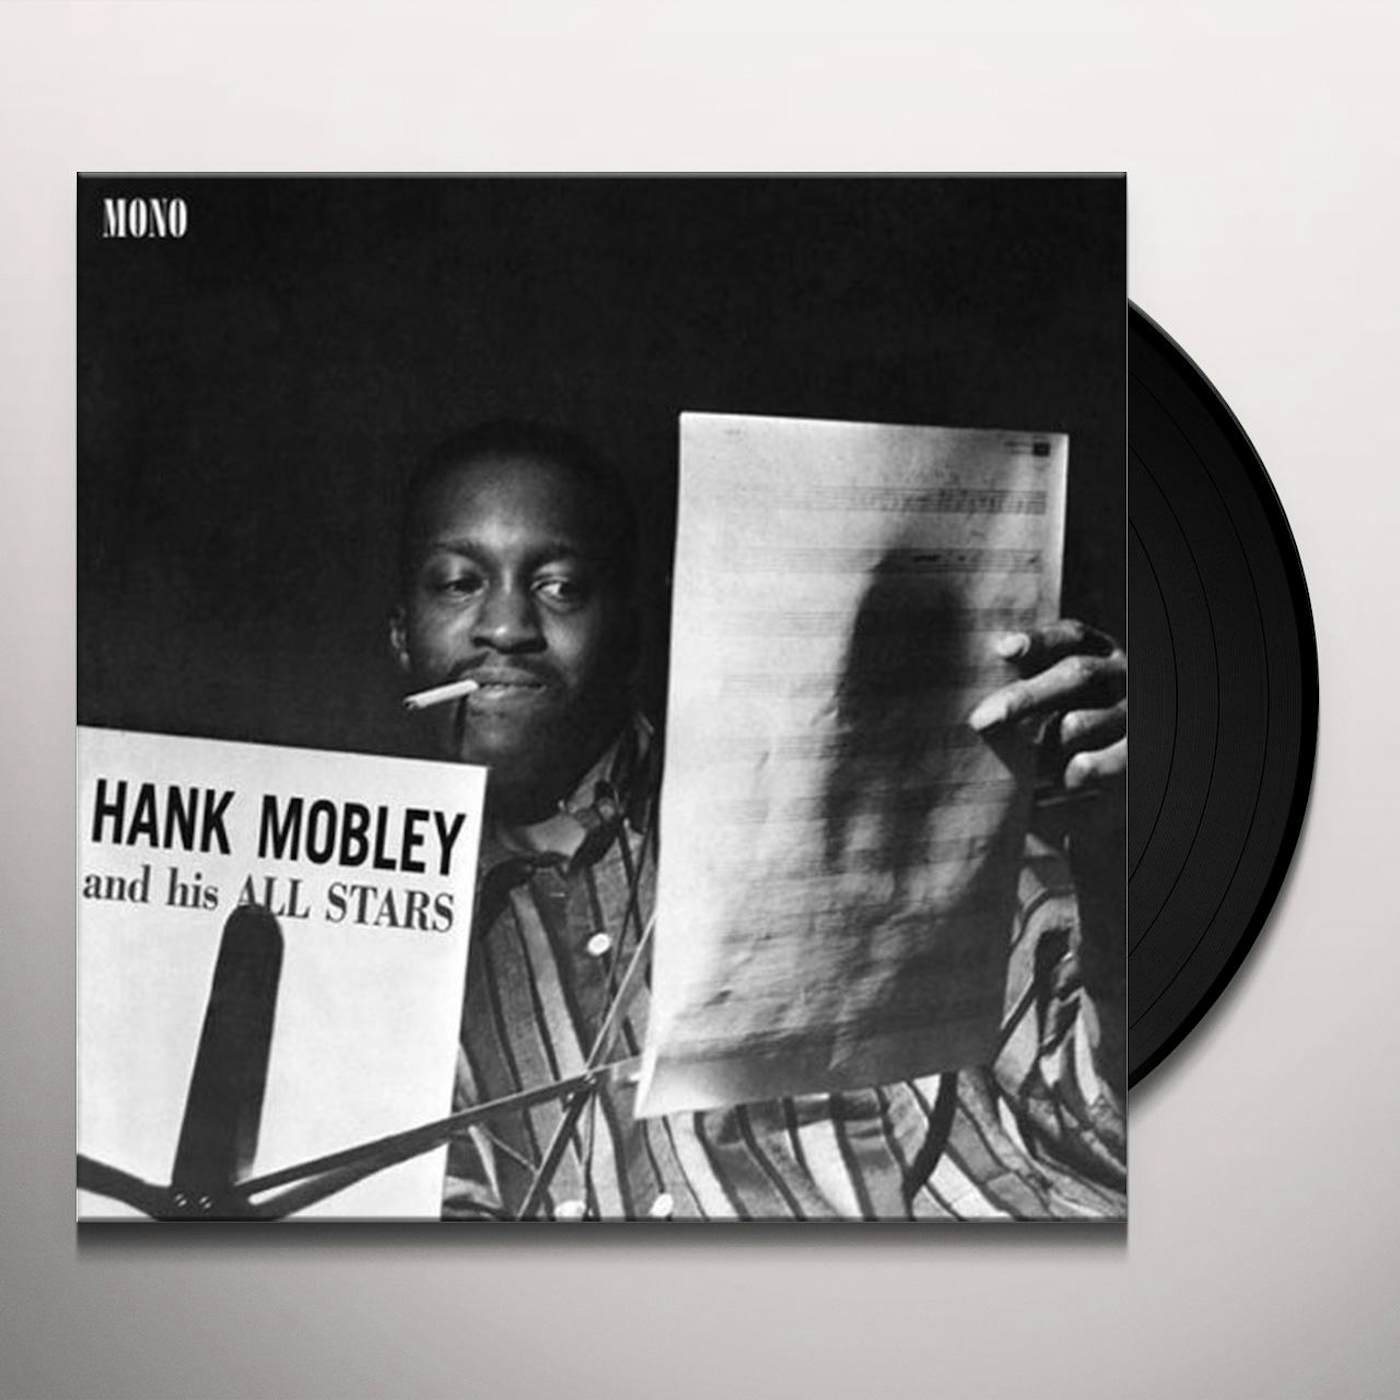 Hank Mobley And His All Stars Vinyl Record